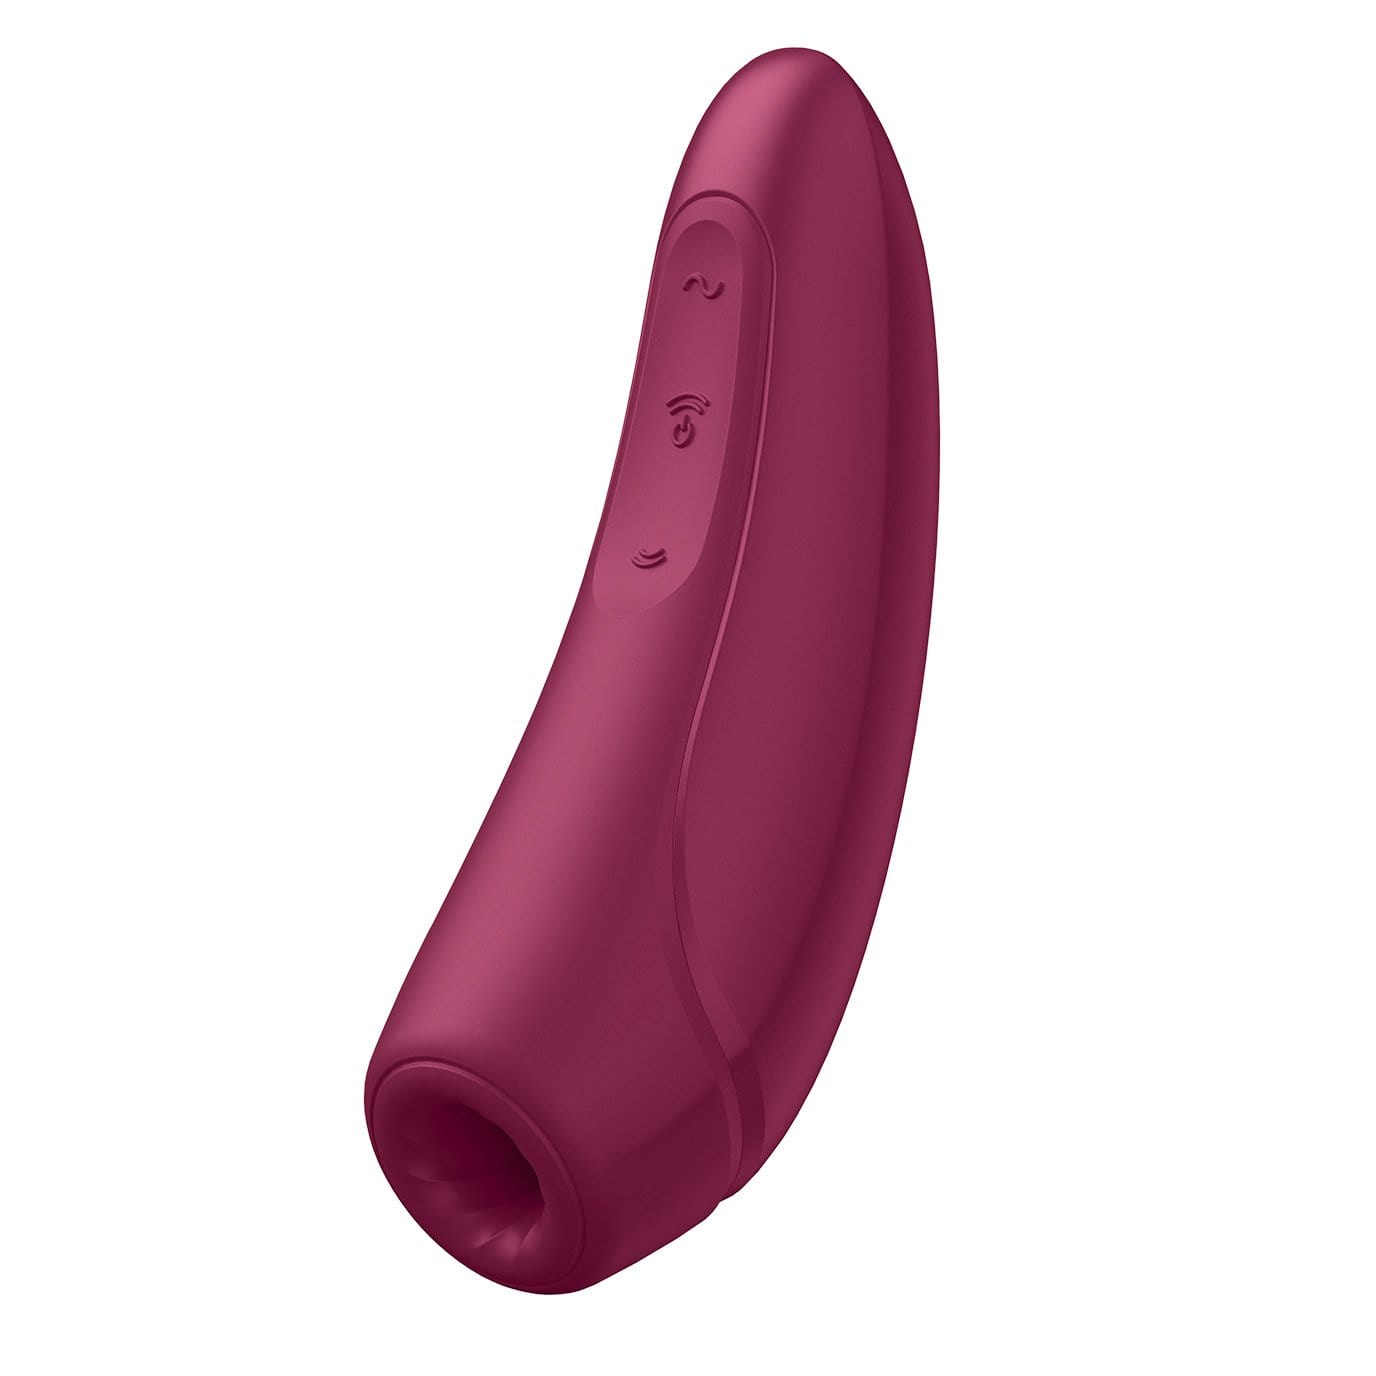 [FREE GIFT] Satisfyer Curvy 1+ App-Controlled Air Pulse Stimulator Vibrator -  Clit Massager (Vibration) Rechargeable  Durio.sg